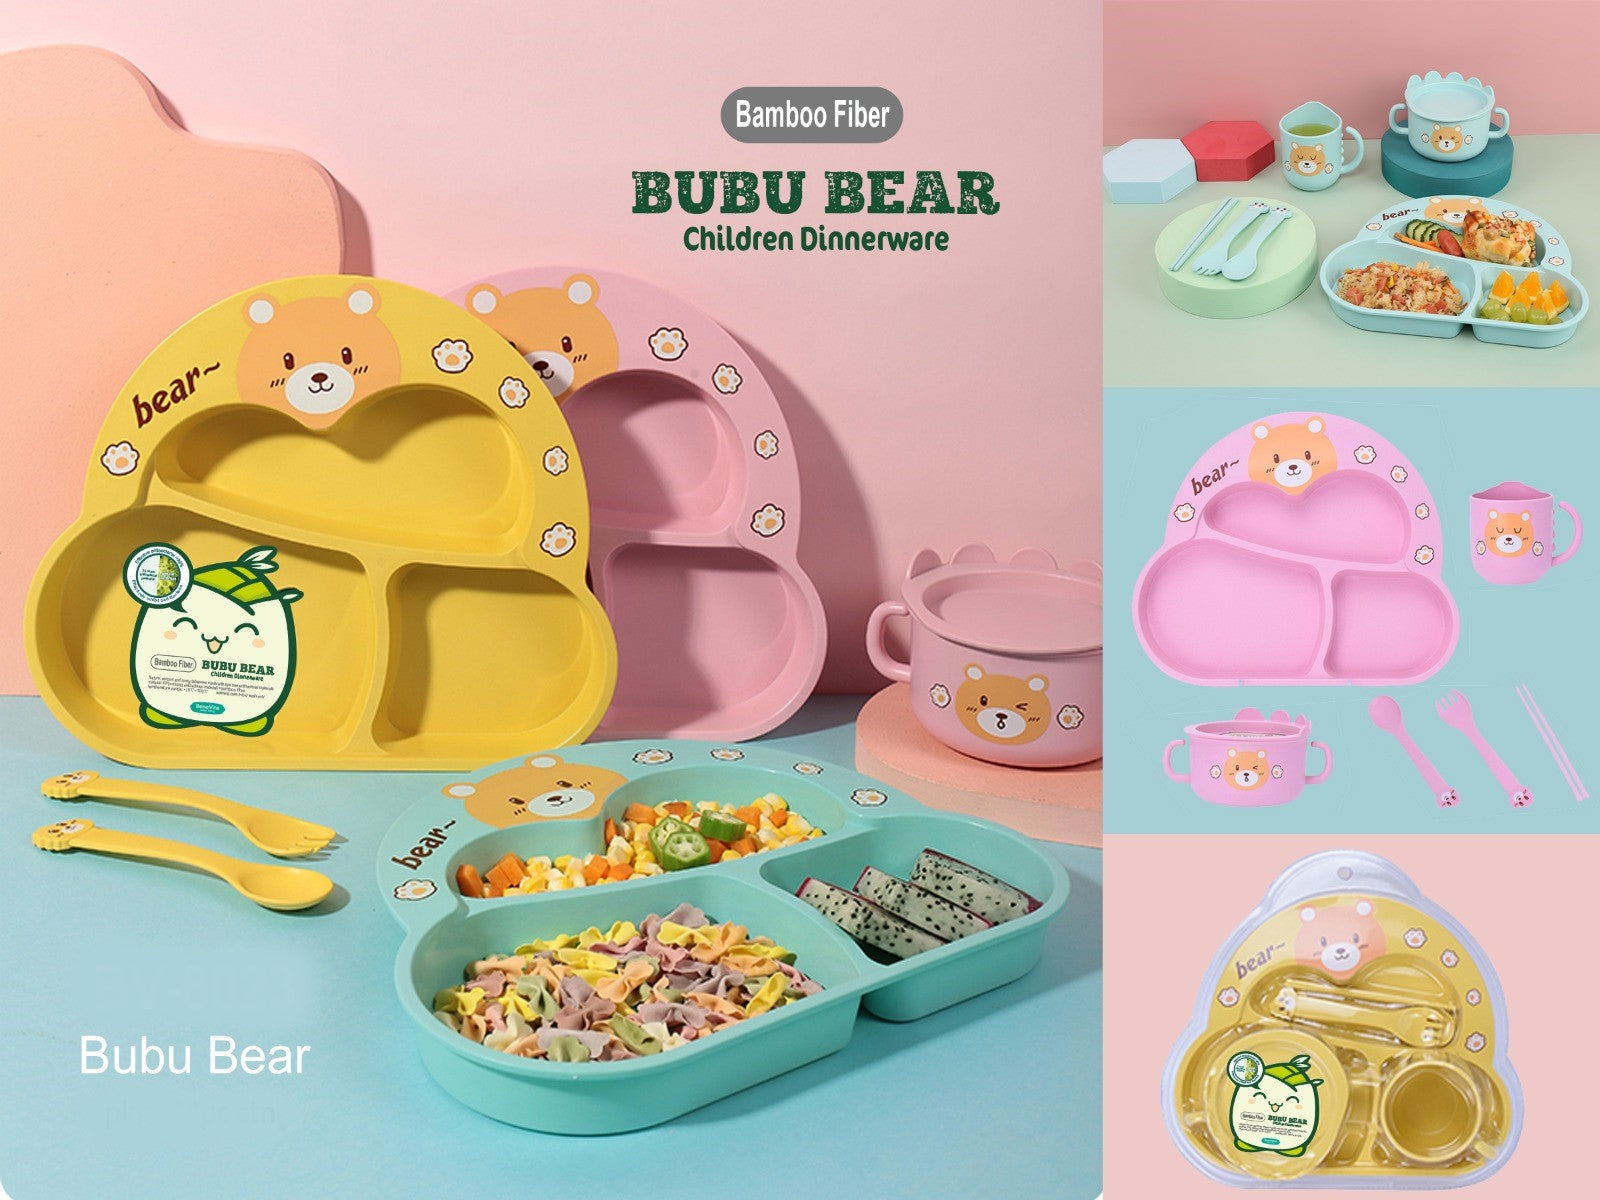 Adorable and Eco-Friendly Bear-themed Bamboo Fiber Feeding Set for Kids